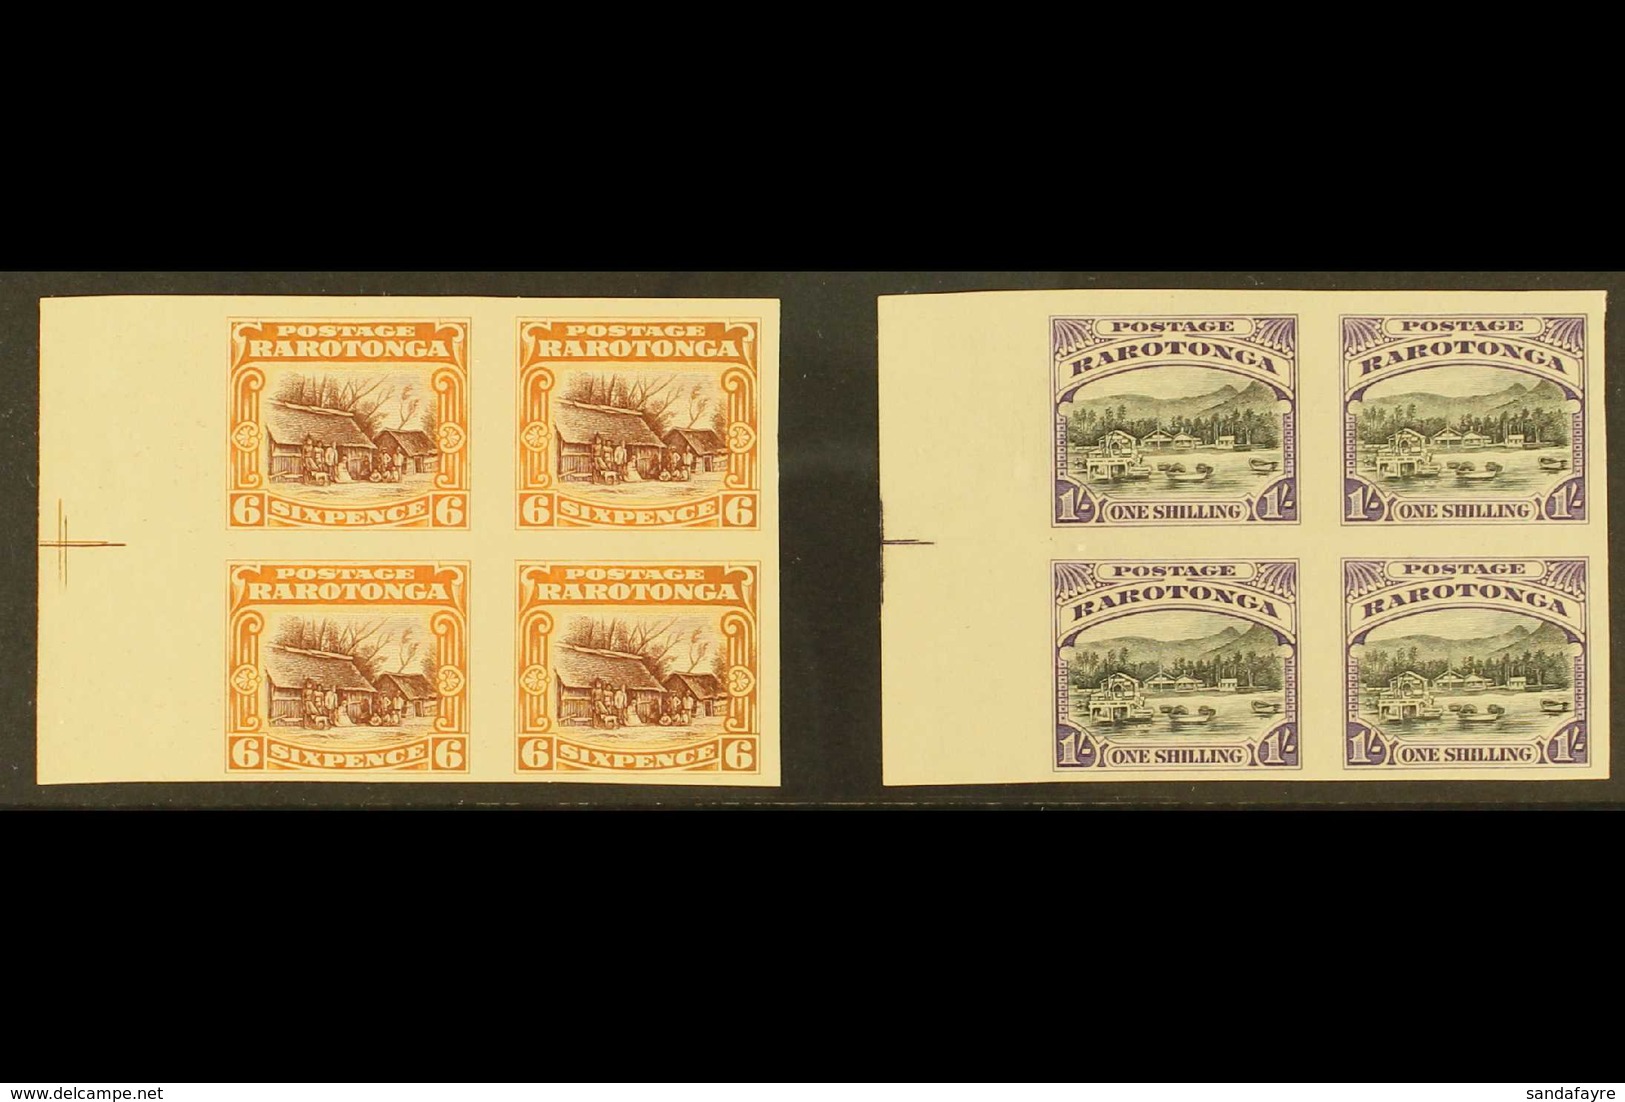 1920 Pictorial Definitive 6d And 1s (as SG 74/75) - IMPERF PLATE PROOF BLOCKS OF FOUR Printed In The Issued Colours On U - Cook